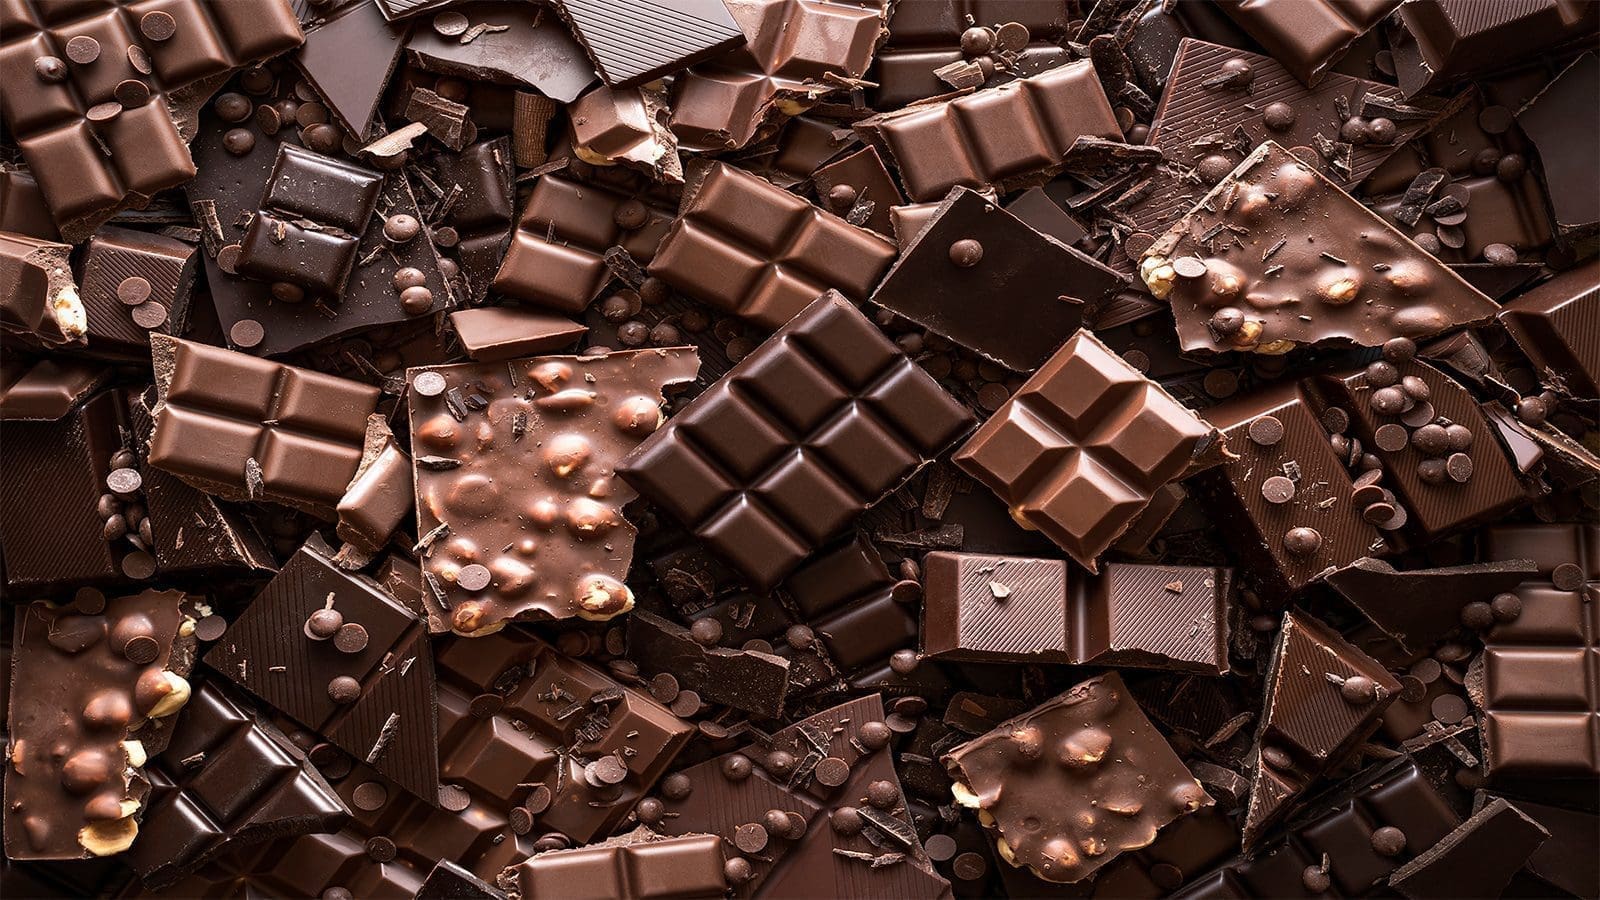 Consumer Reports finds heavy metal contamination in popular dark chocolate brands